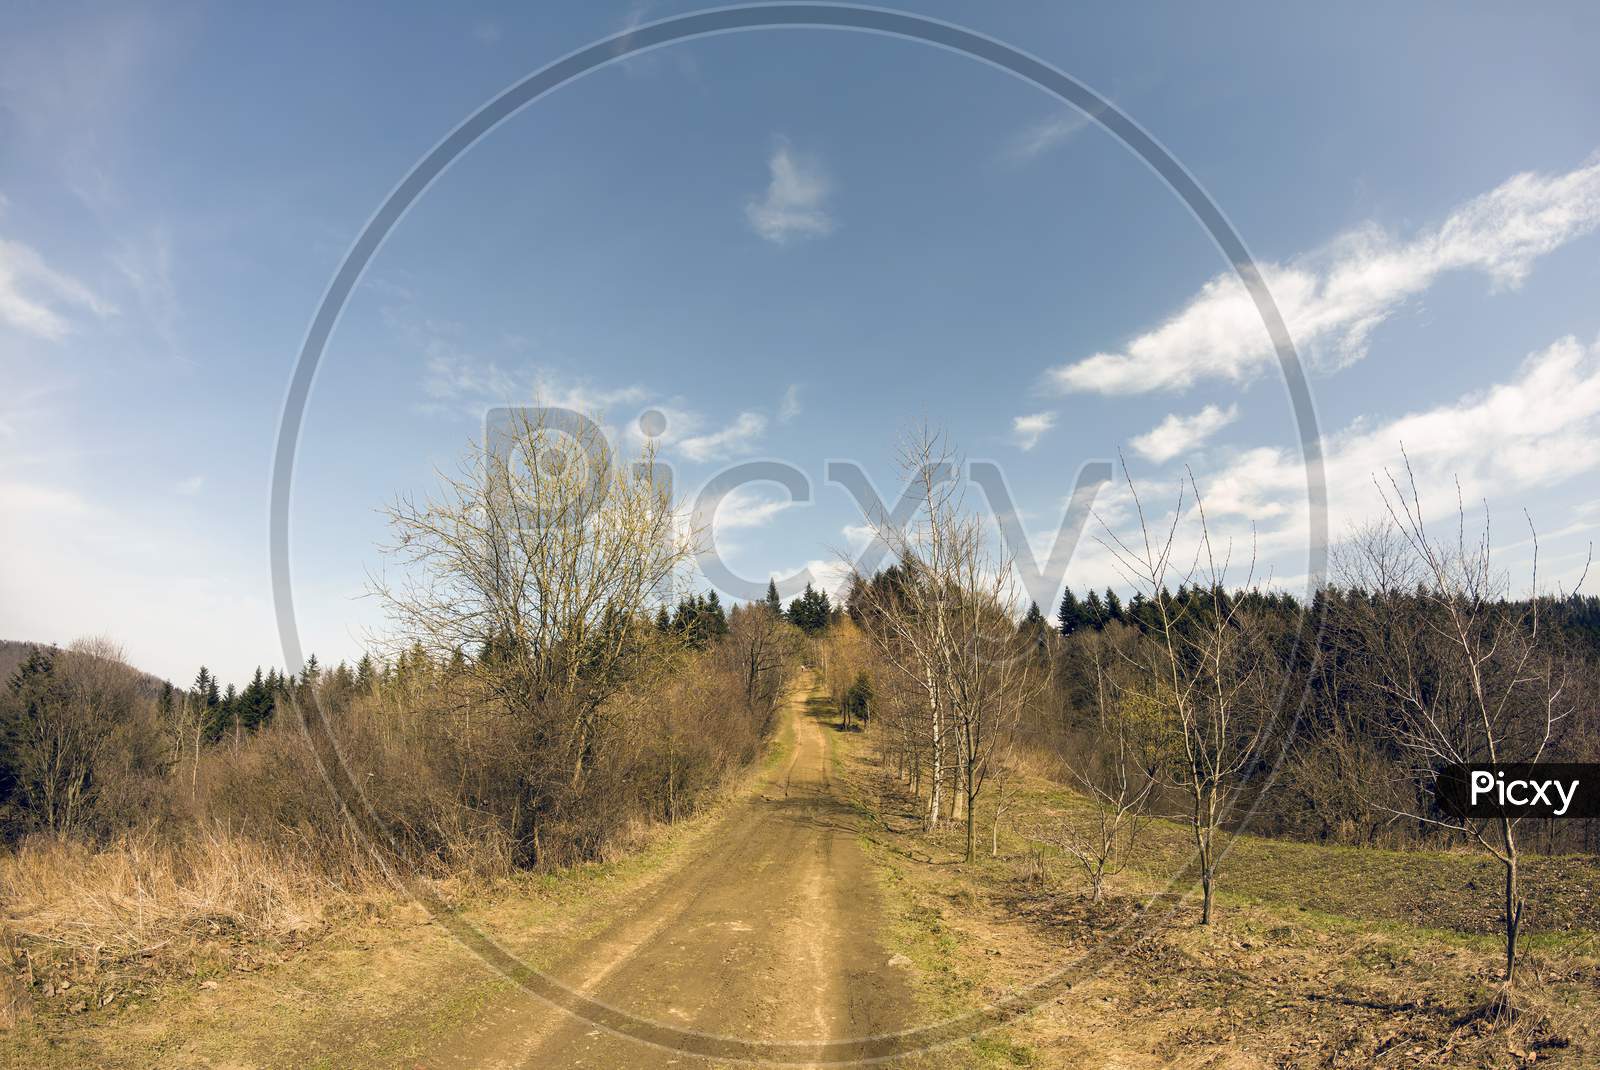 Limanowa, Poland: Wide Angle Shot Of Łysa Góra (Beskid Wyspowy) Landscape With Dirt Road Surrounded With Trees In Forest On Polish Mountains Against Blue Sky